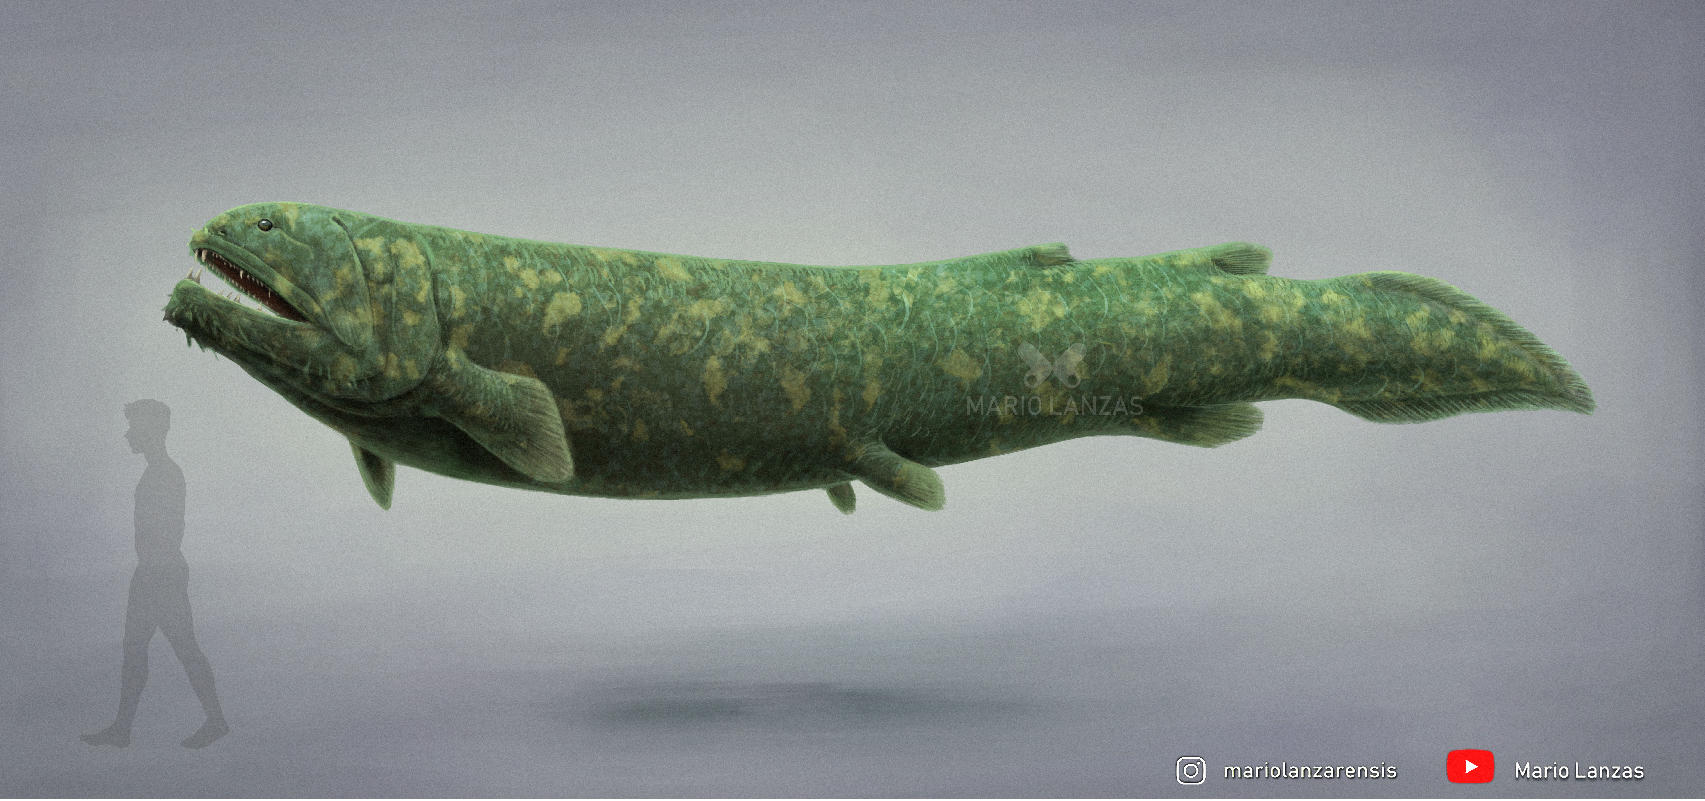 Mario Lanzas on Twitter: "RHIZODUS (from the Carboniferous themed video:  https://t.co/xh36tw30Kp) Probably one of the largest lobe-finned fish ever  existed #paleoart #rhizodus #carboniferous #sayhitograndpa #naturalhistory  #bigfish https://t.co ...